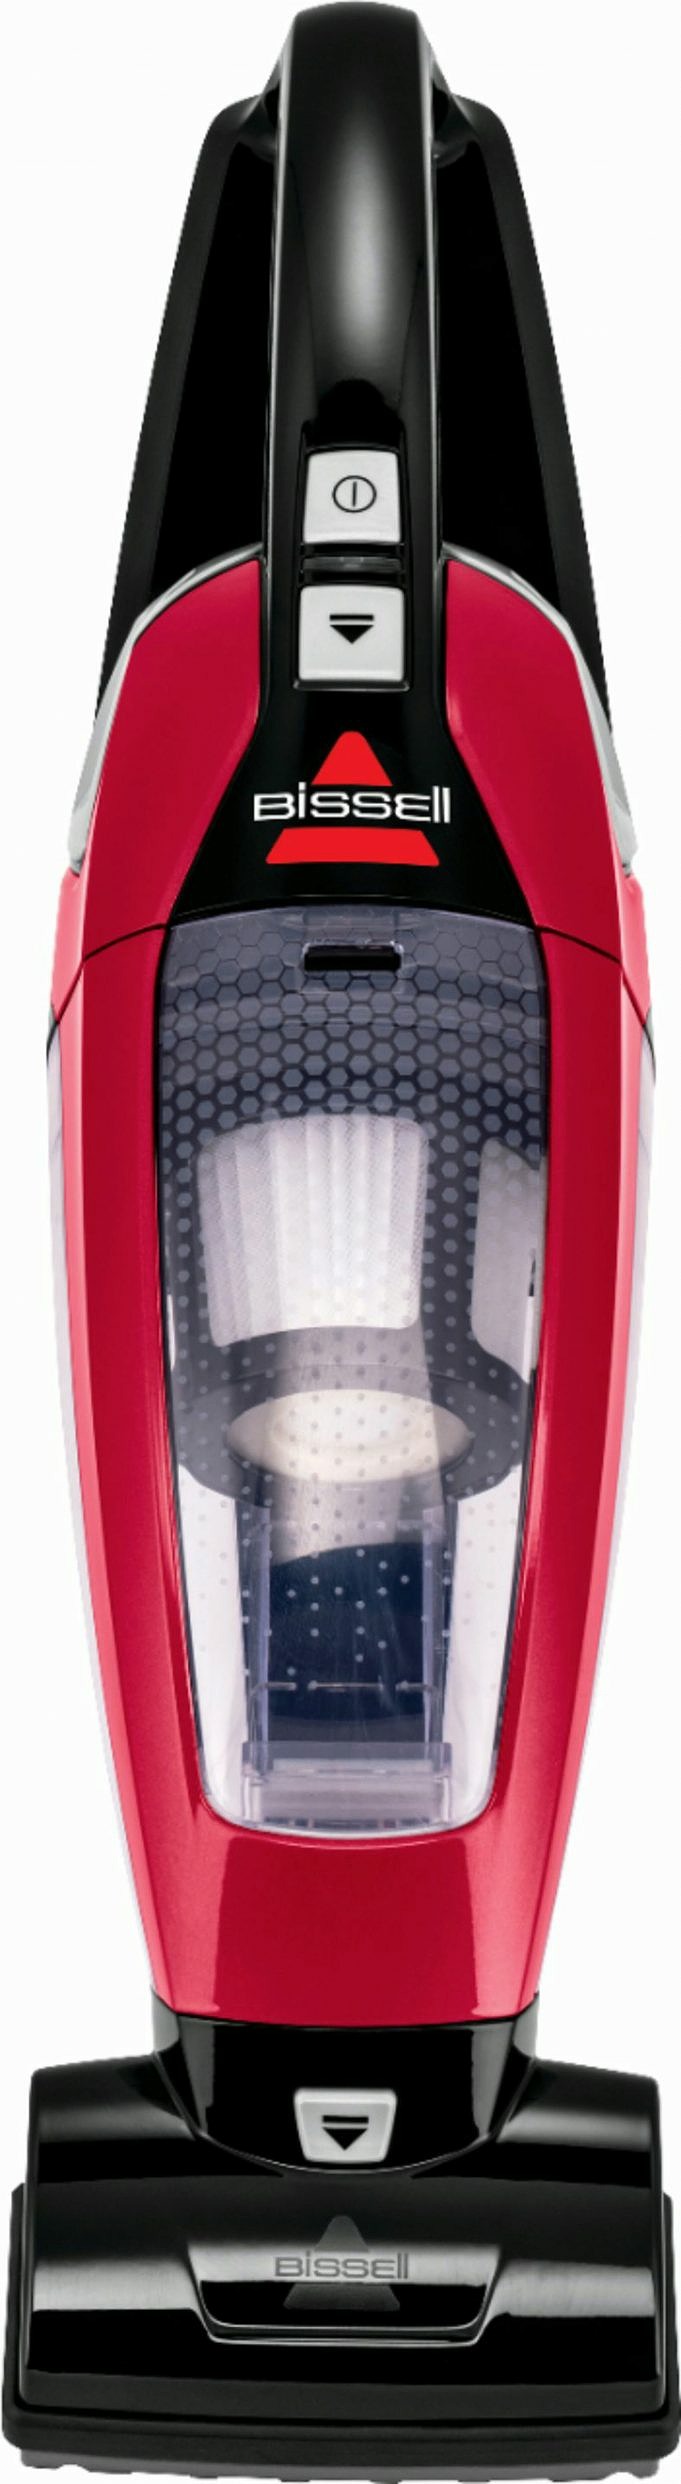 Bissell Auto-Mate 2284W Cordless Hand Car Vac